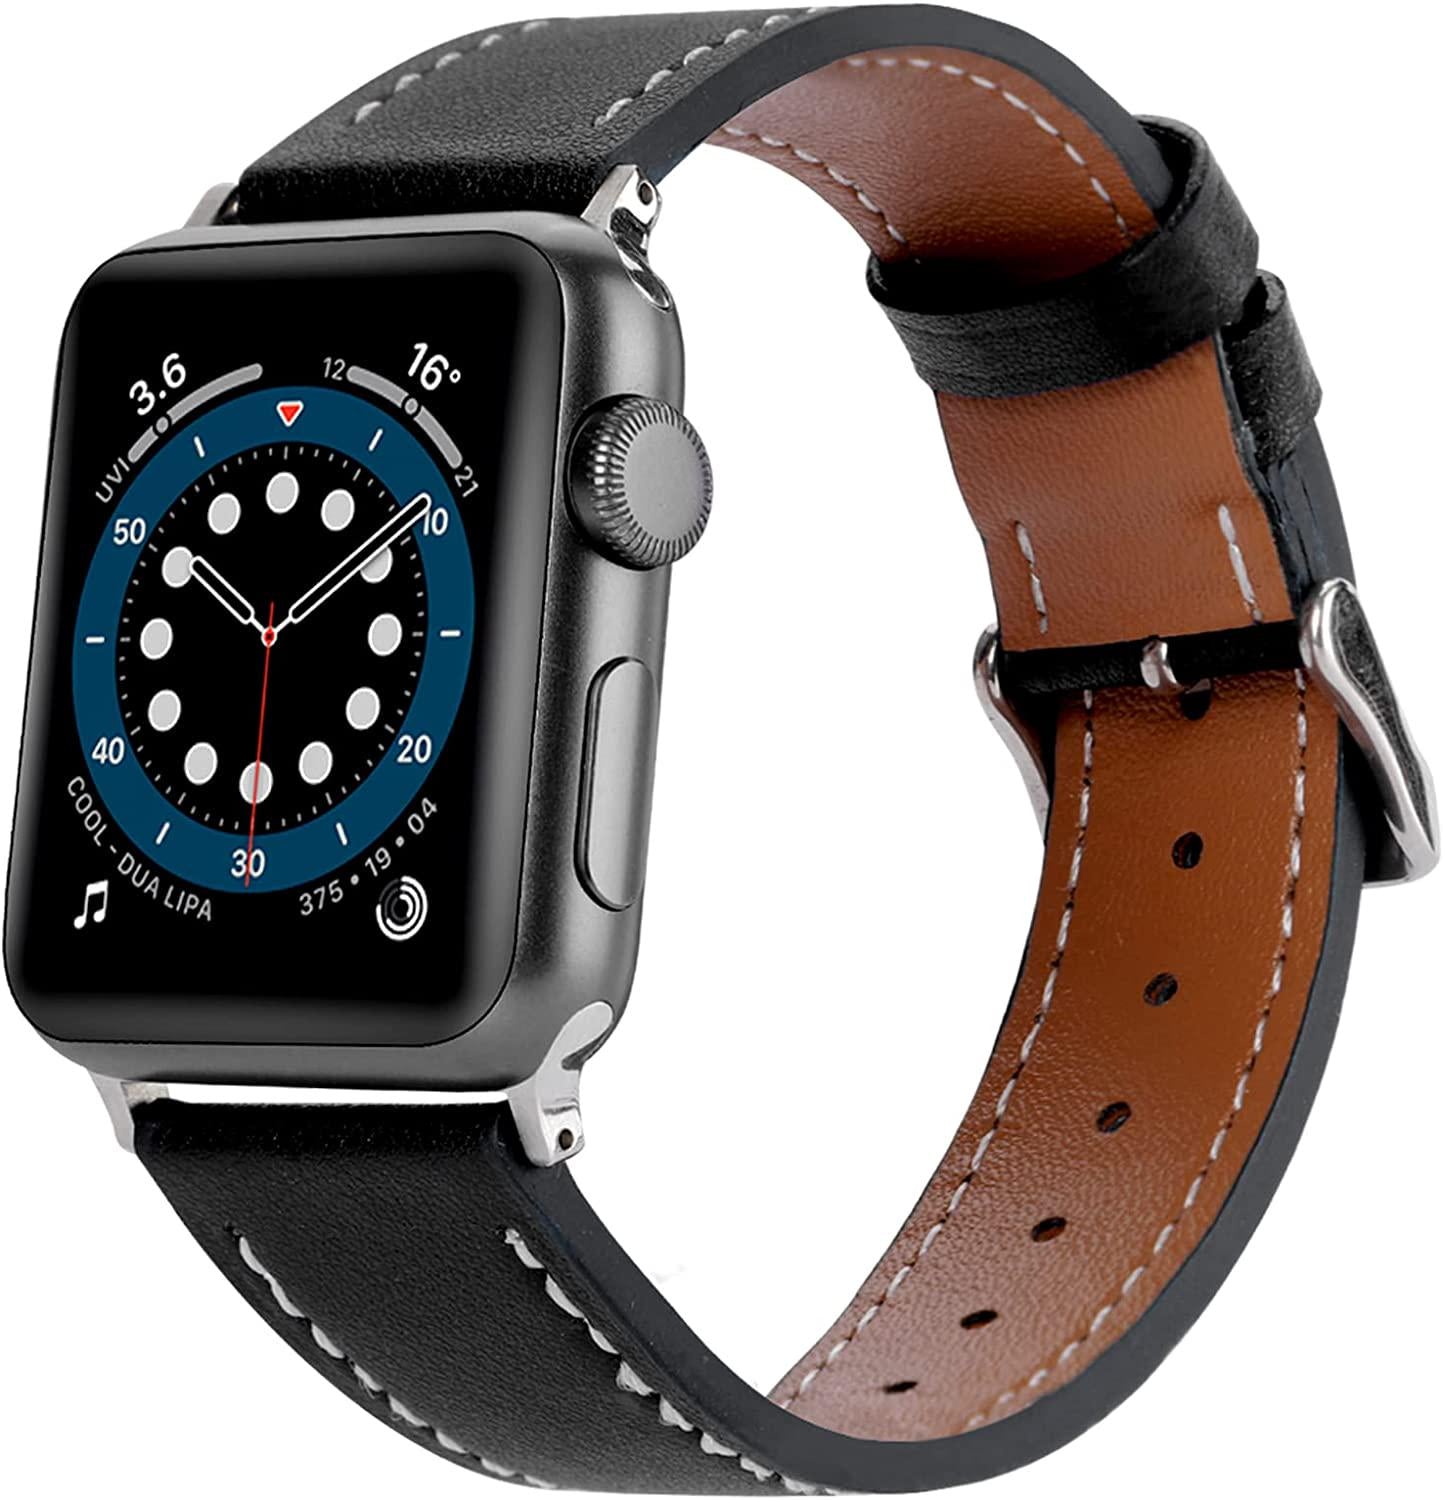 MAPPL, MAPPL Leather Bands Compatible with Apple Watch Band 38mm 40mm 41mm 42mm 44mm 45mm for Men Women, Soft Leather Wristband Replacement Band Strap for iWatch Watch Series SE 7 6 5 4 3 2 1